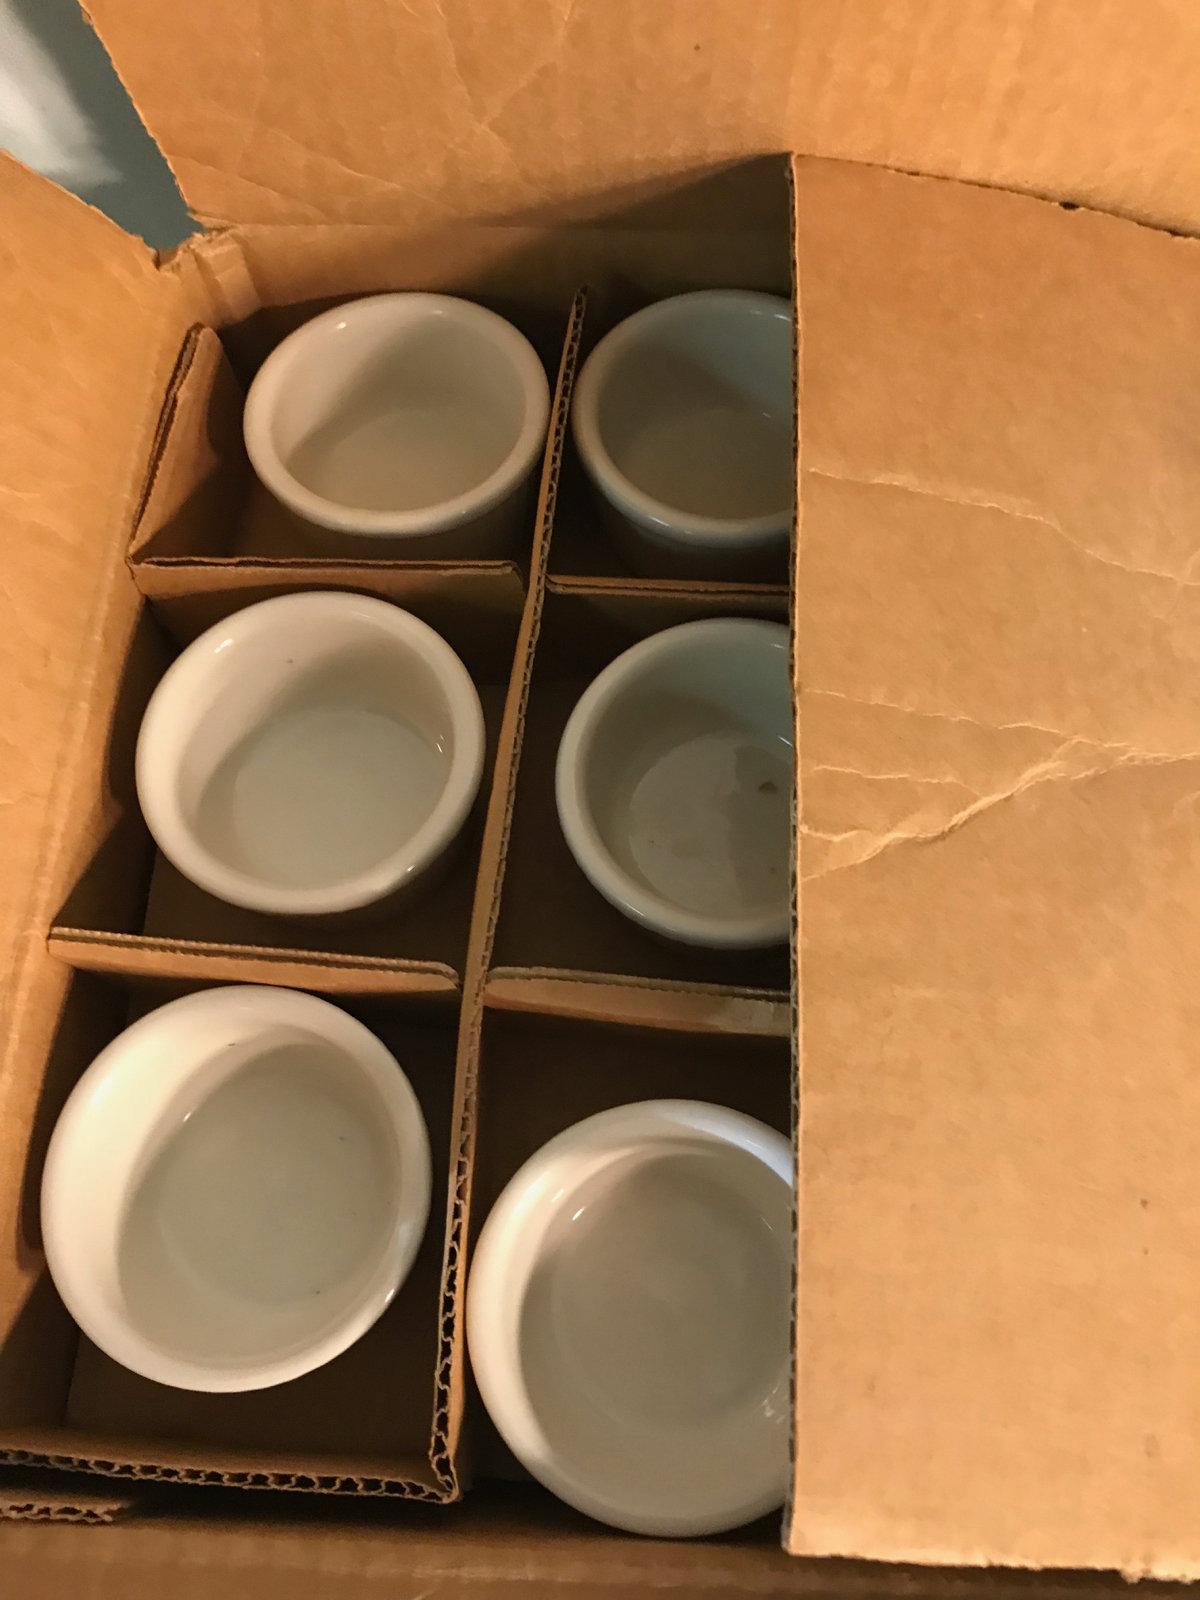 71 count 2 inch sauce bowls, made by Hall